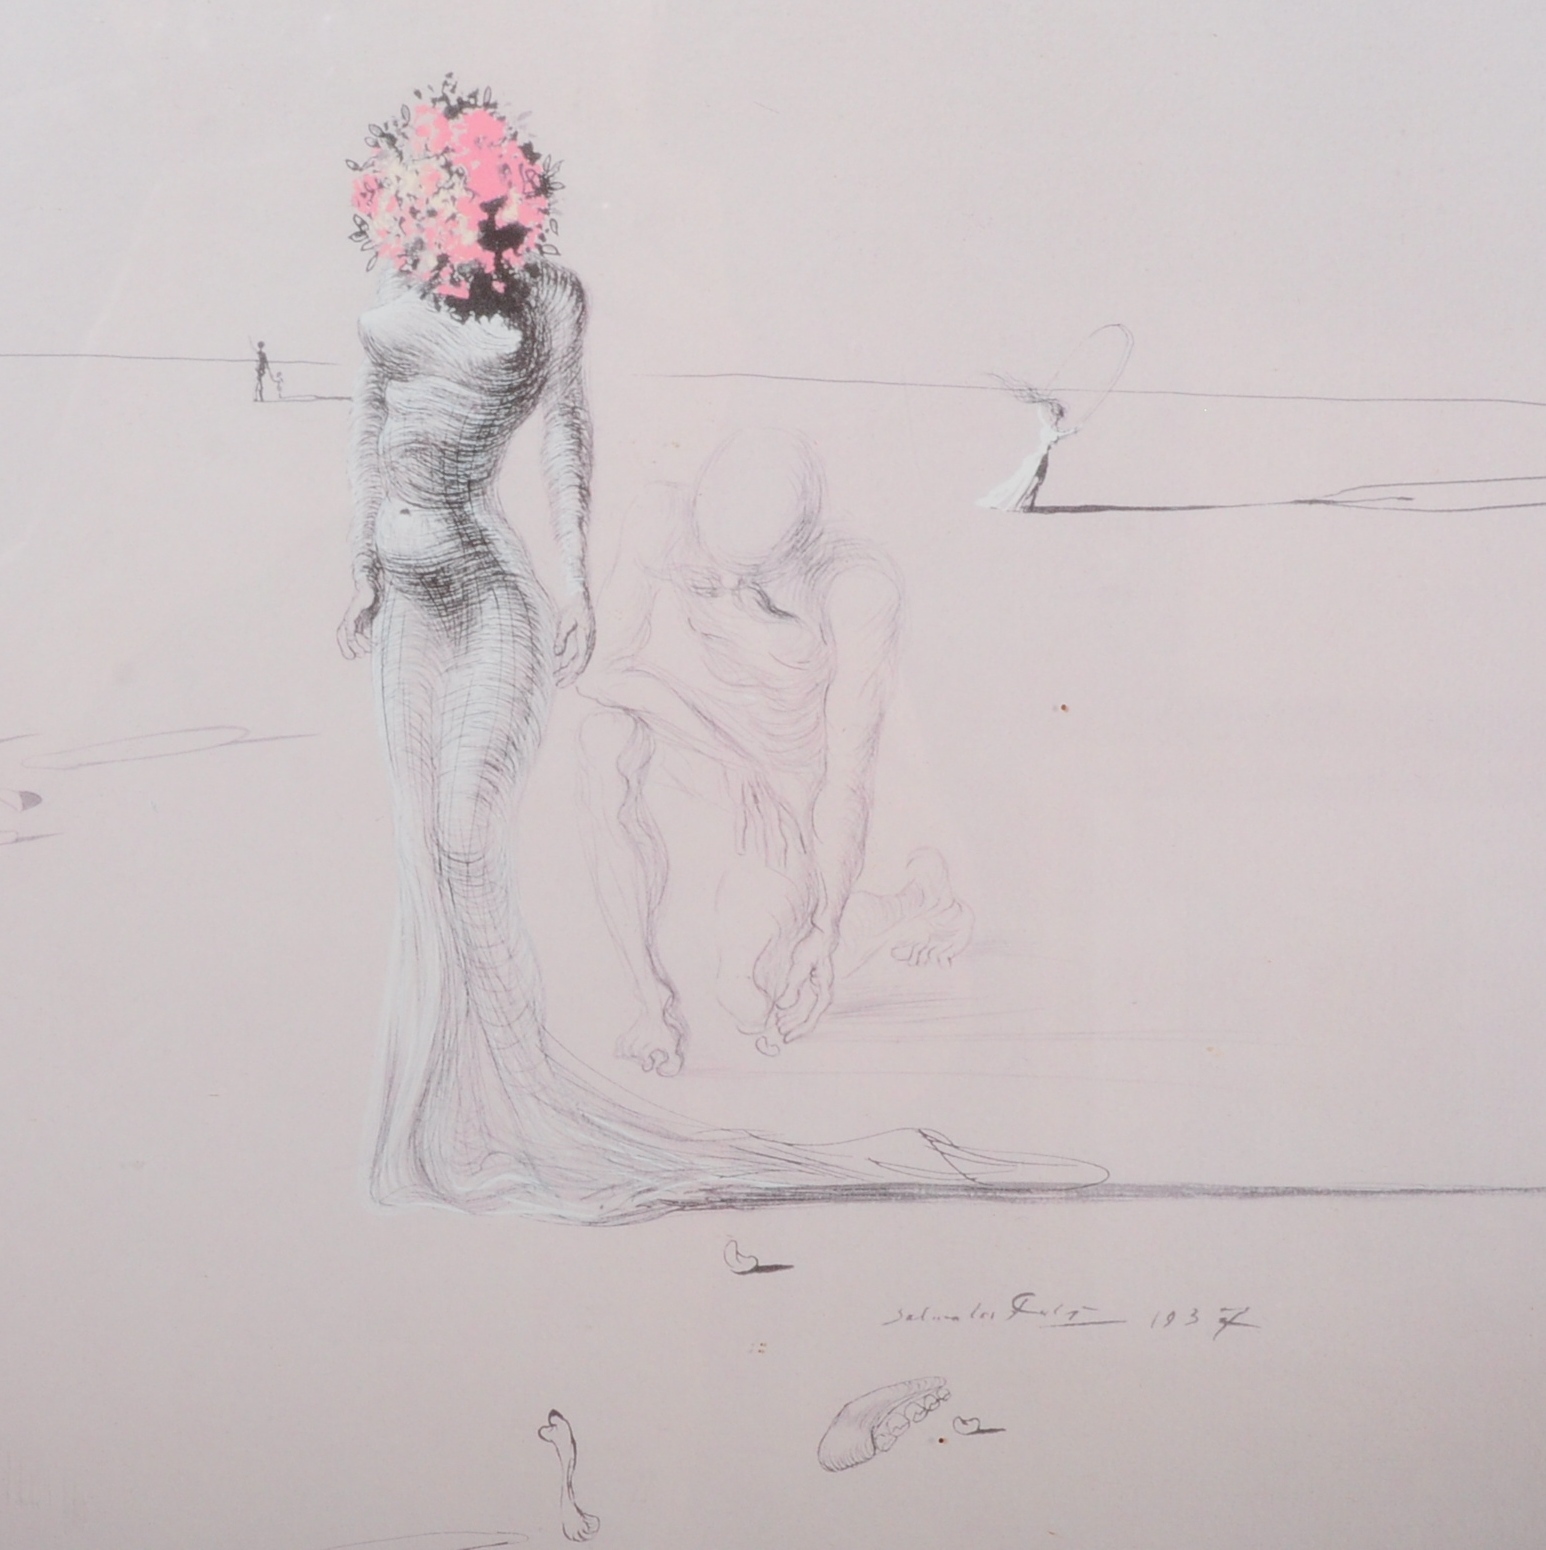 CONTEMPORARY WOMAN WITH FLOWER HEAD SALVADOR DALI PRINT - Image 2 of 5